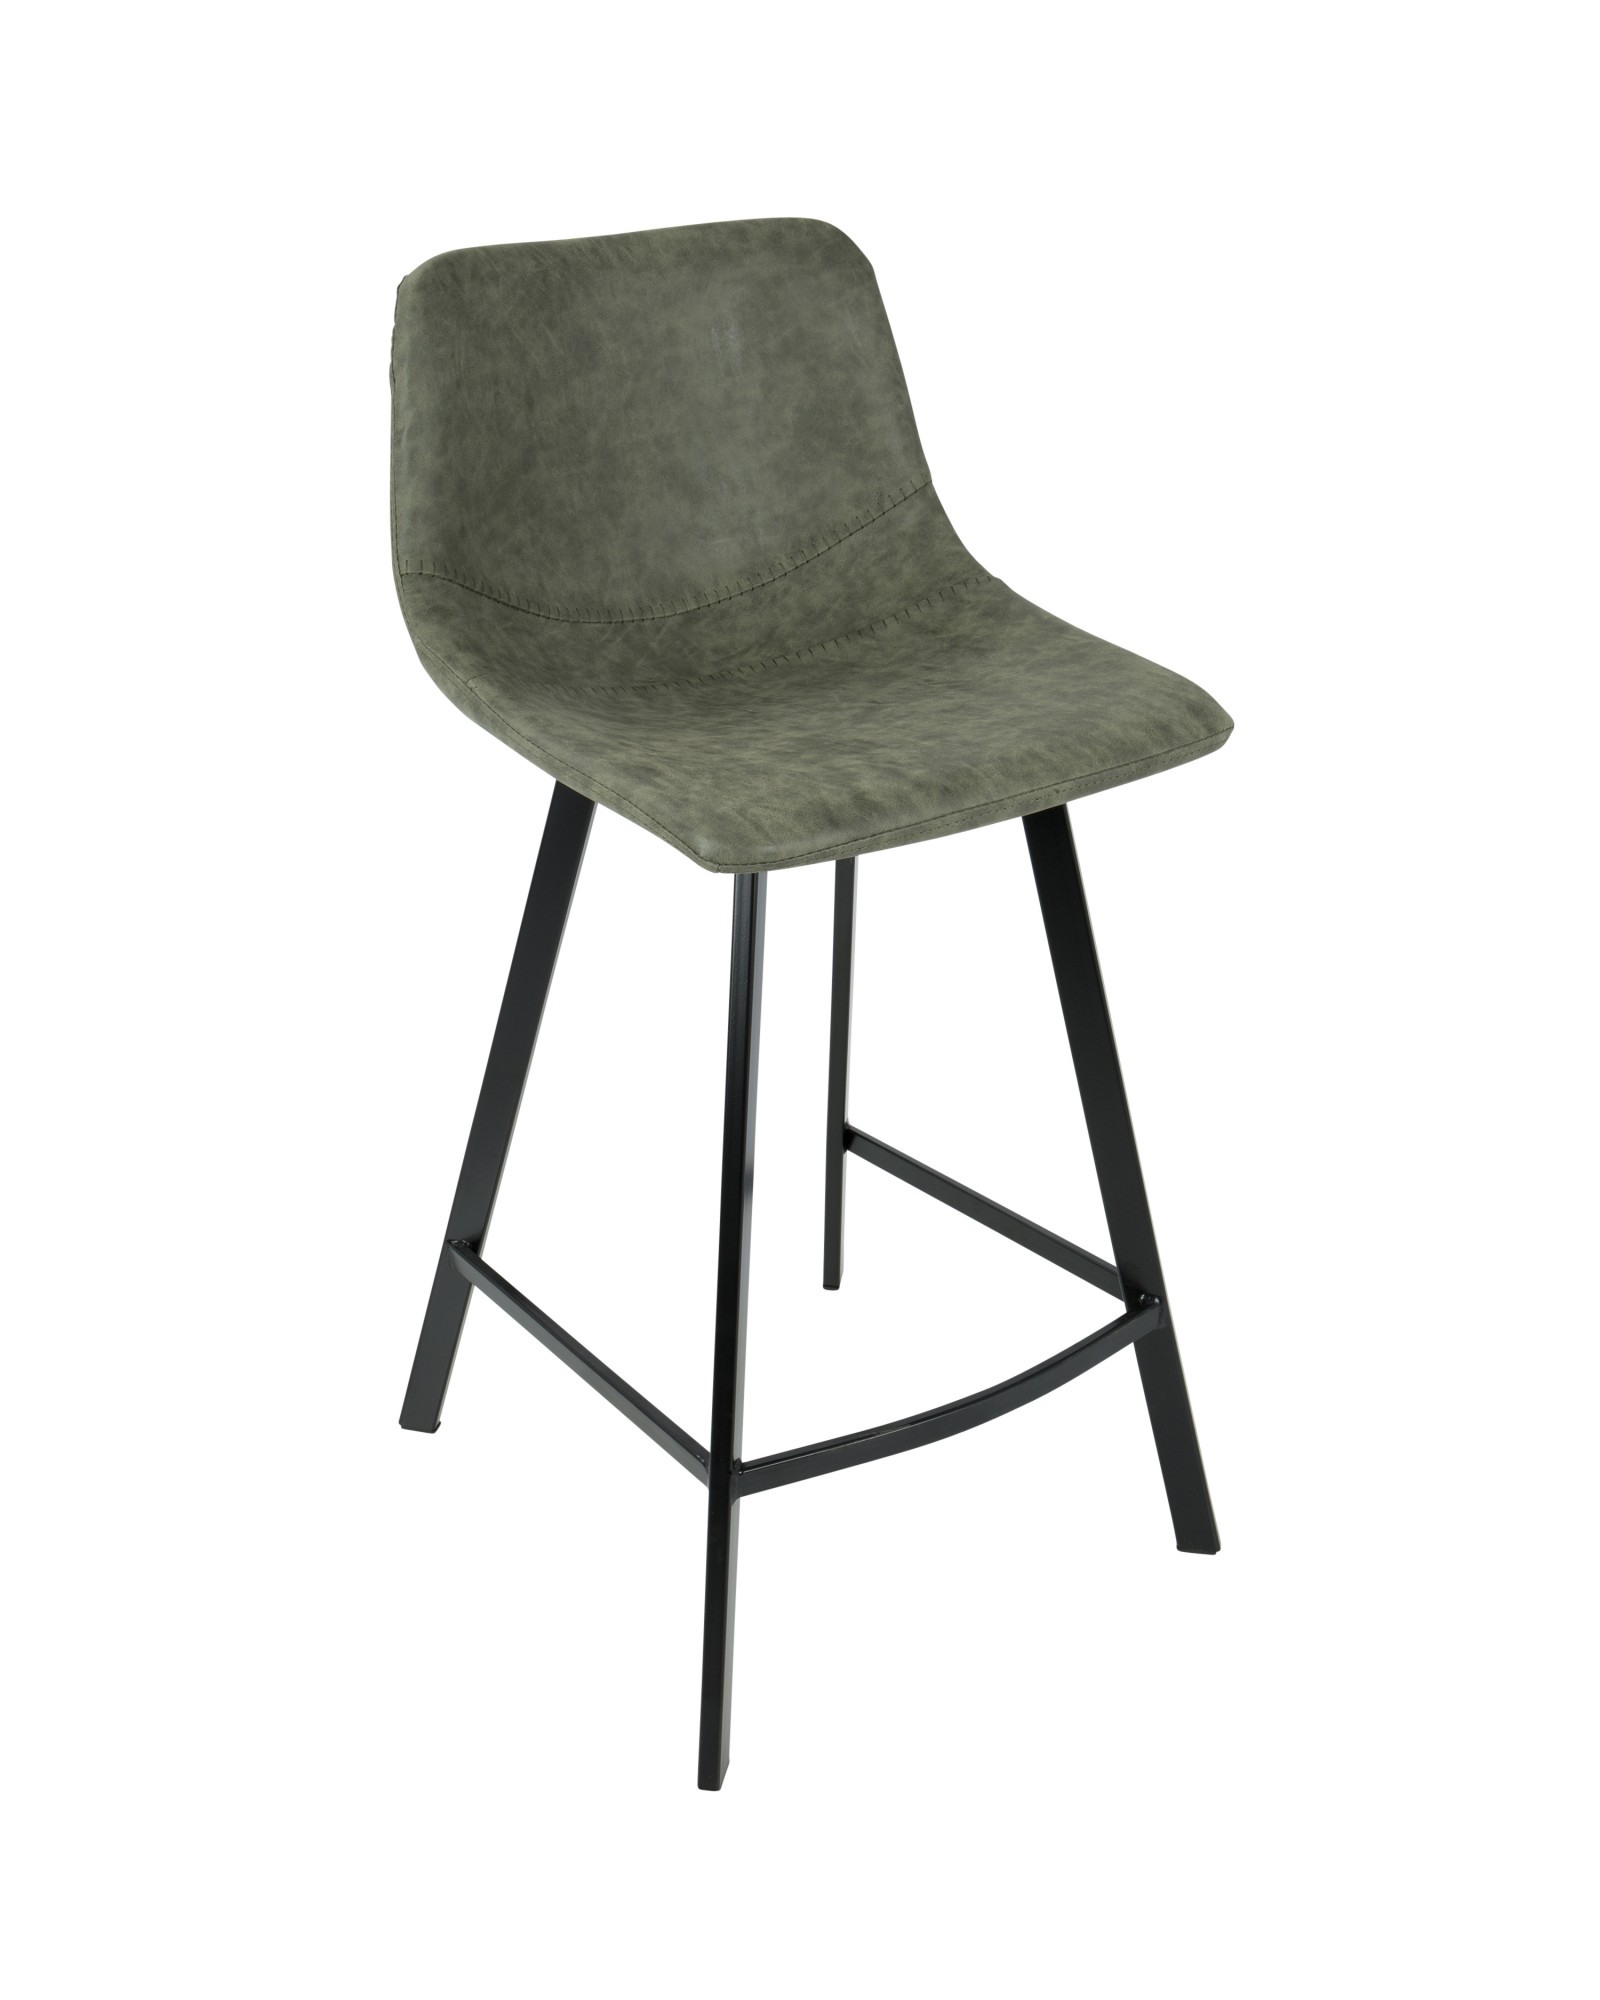 Outlaw Industrial Counter Stool in Black with Green Faux Leather - Set of 2